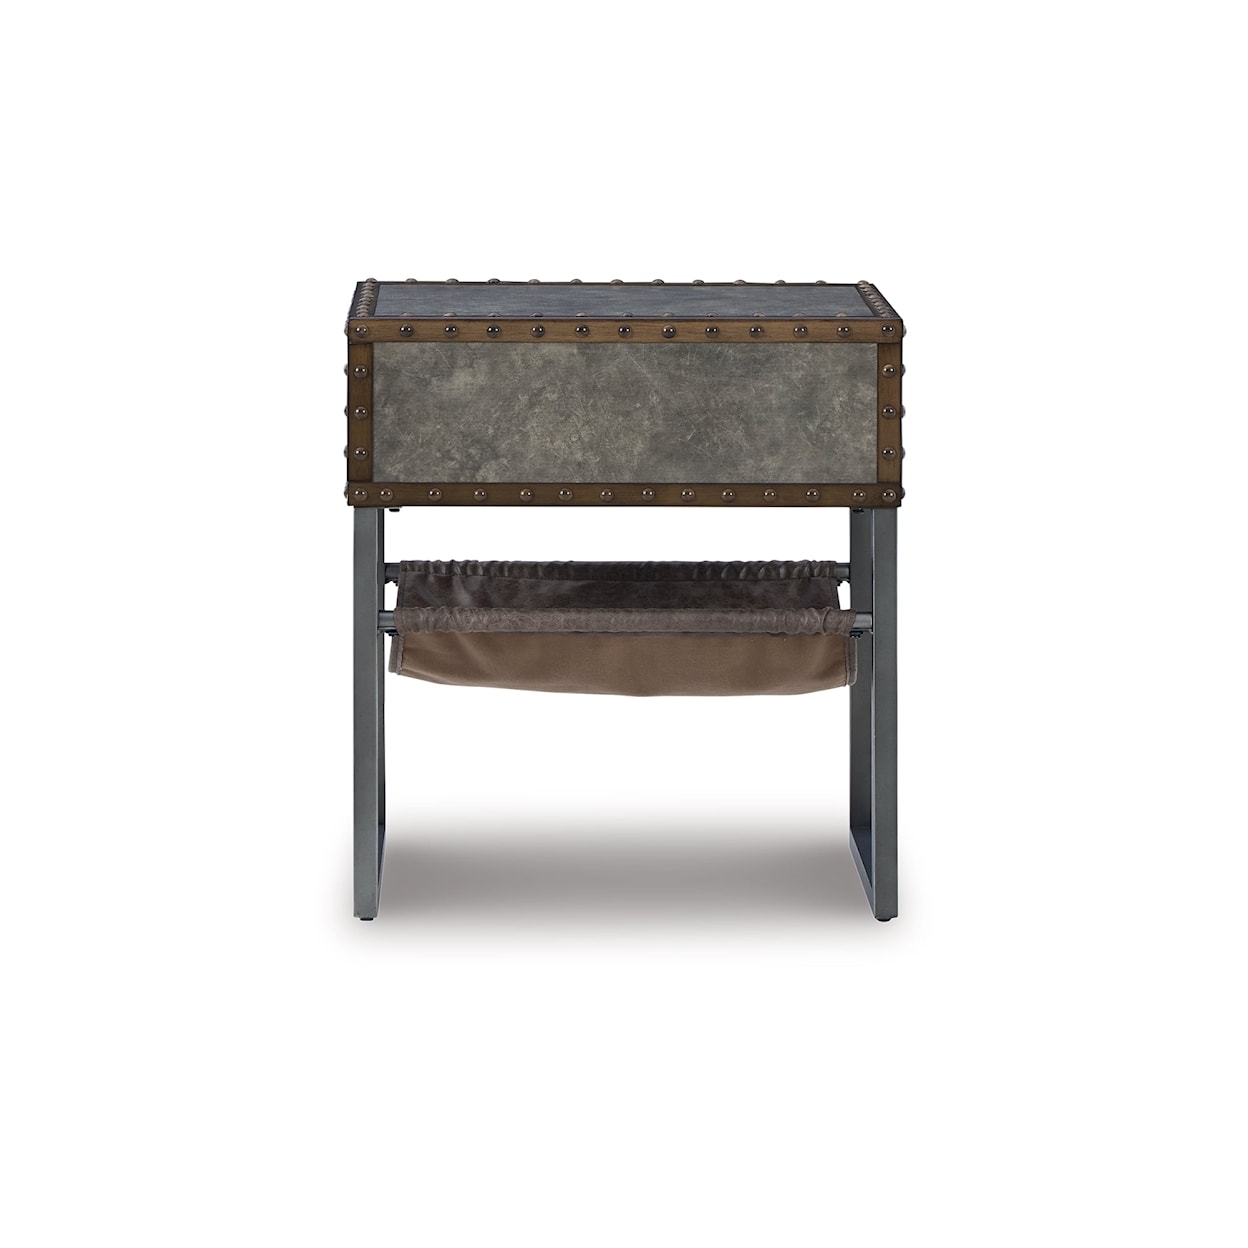 Signature Derrylin End Table